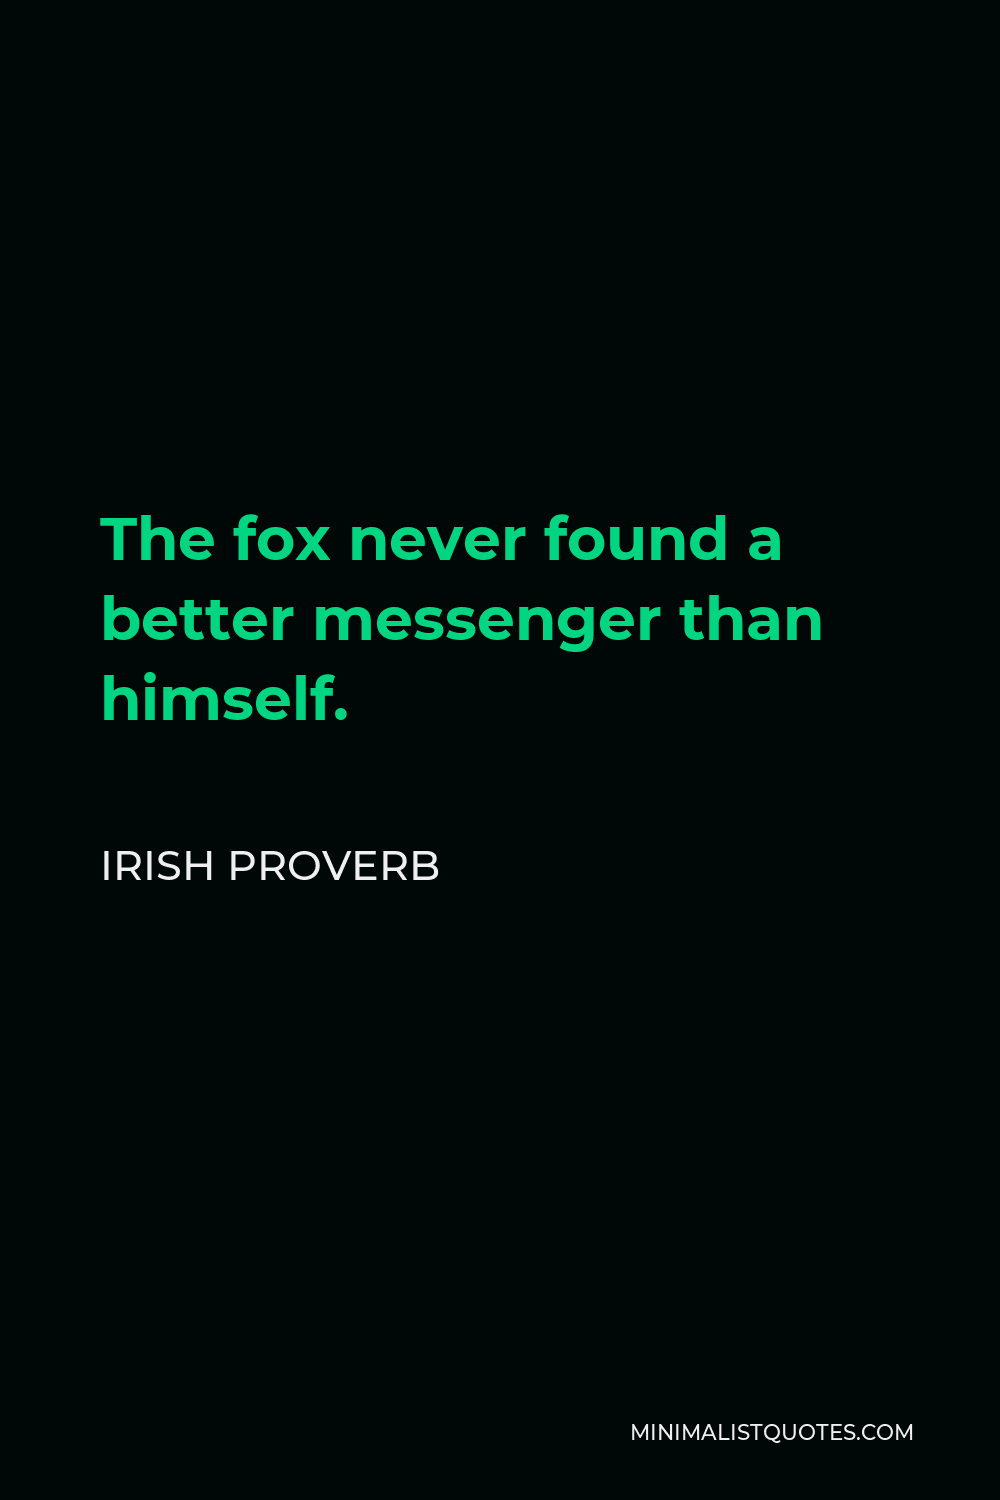 Irish Proverb Quote - The fox never found a better messenger than himself.